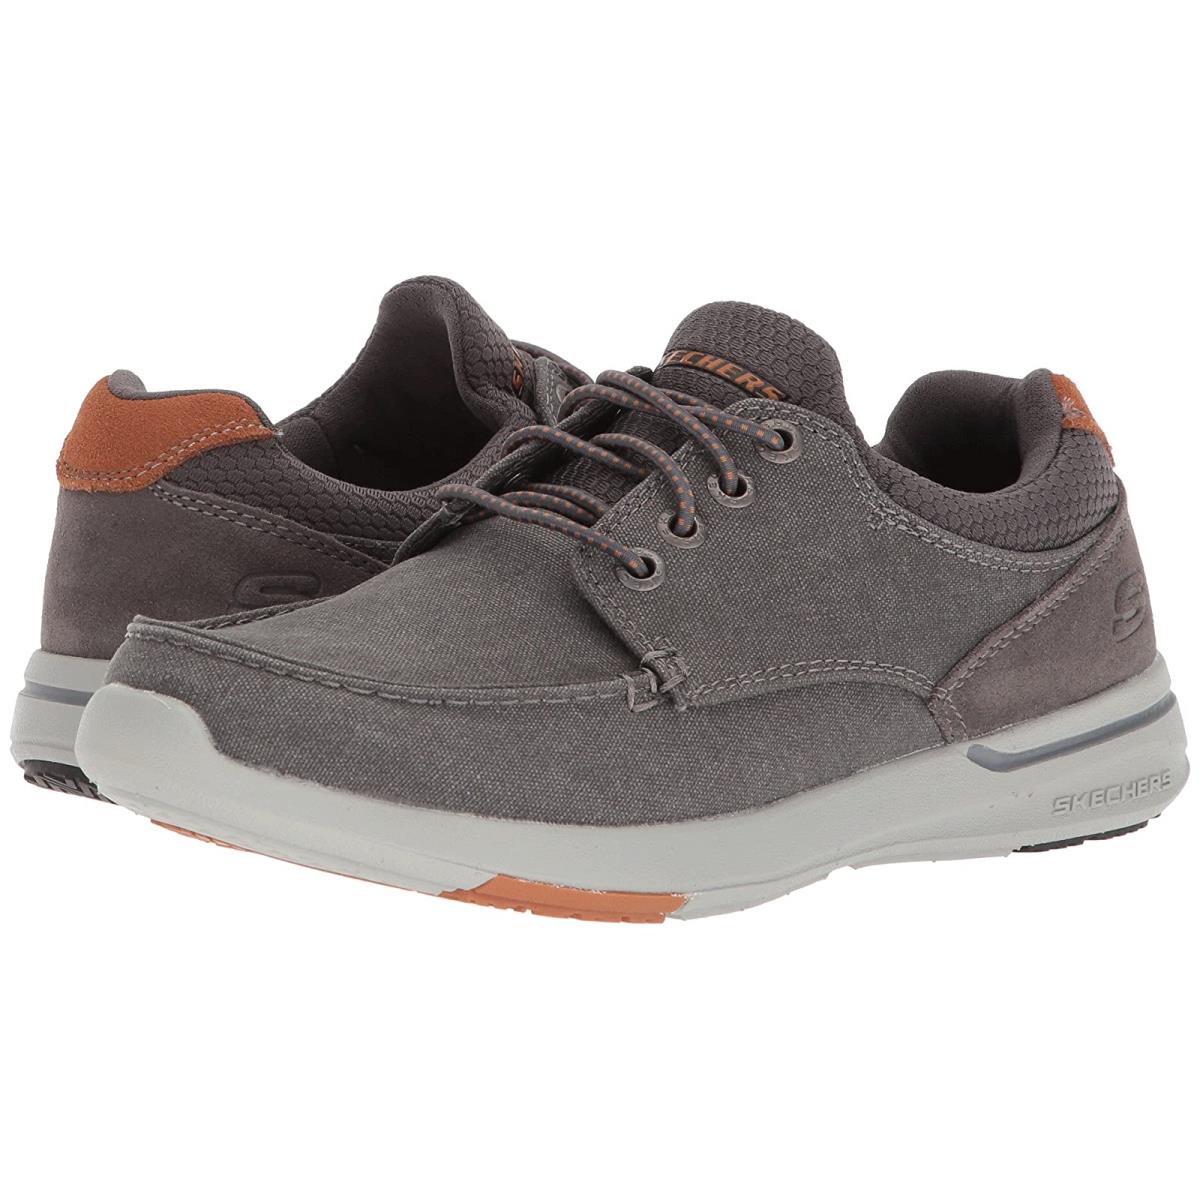 Man`s Boat Shoes Skechers Relaxed Fit: Elent - Mosen Charcoal